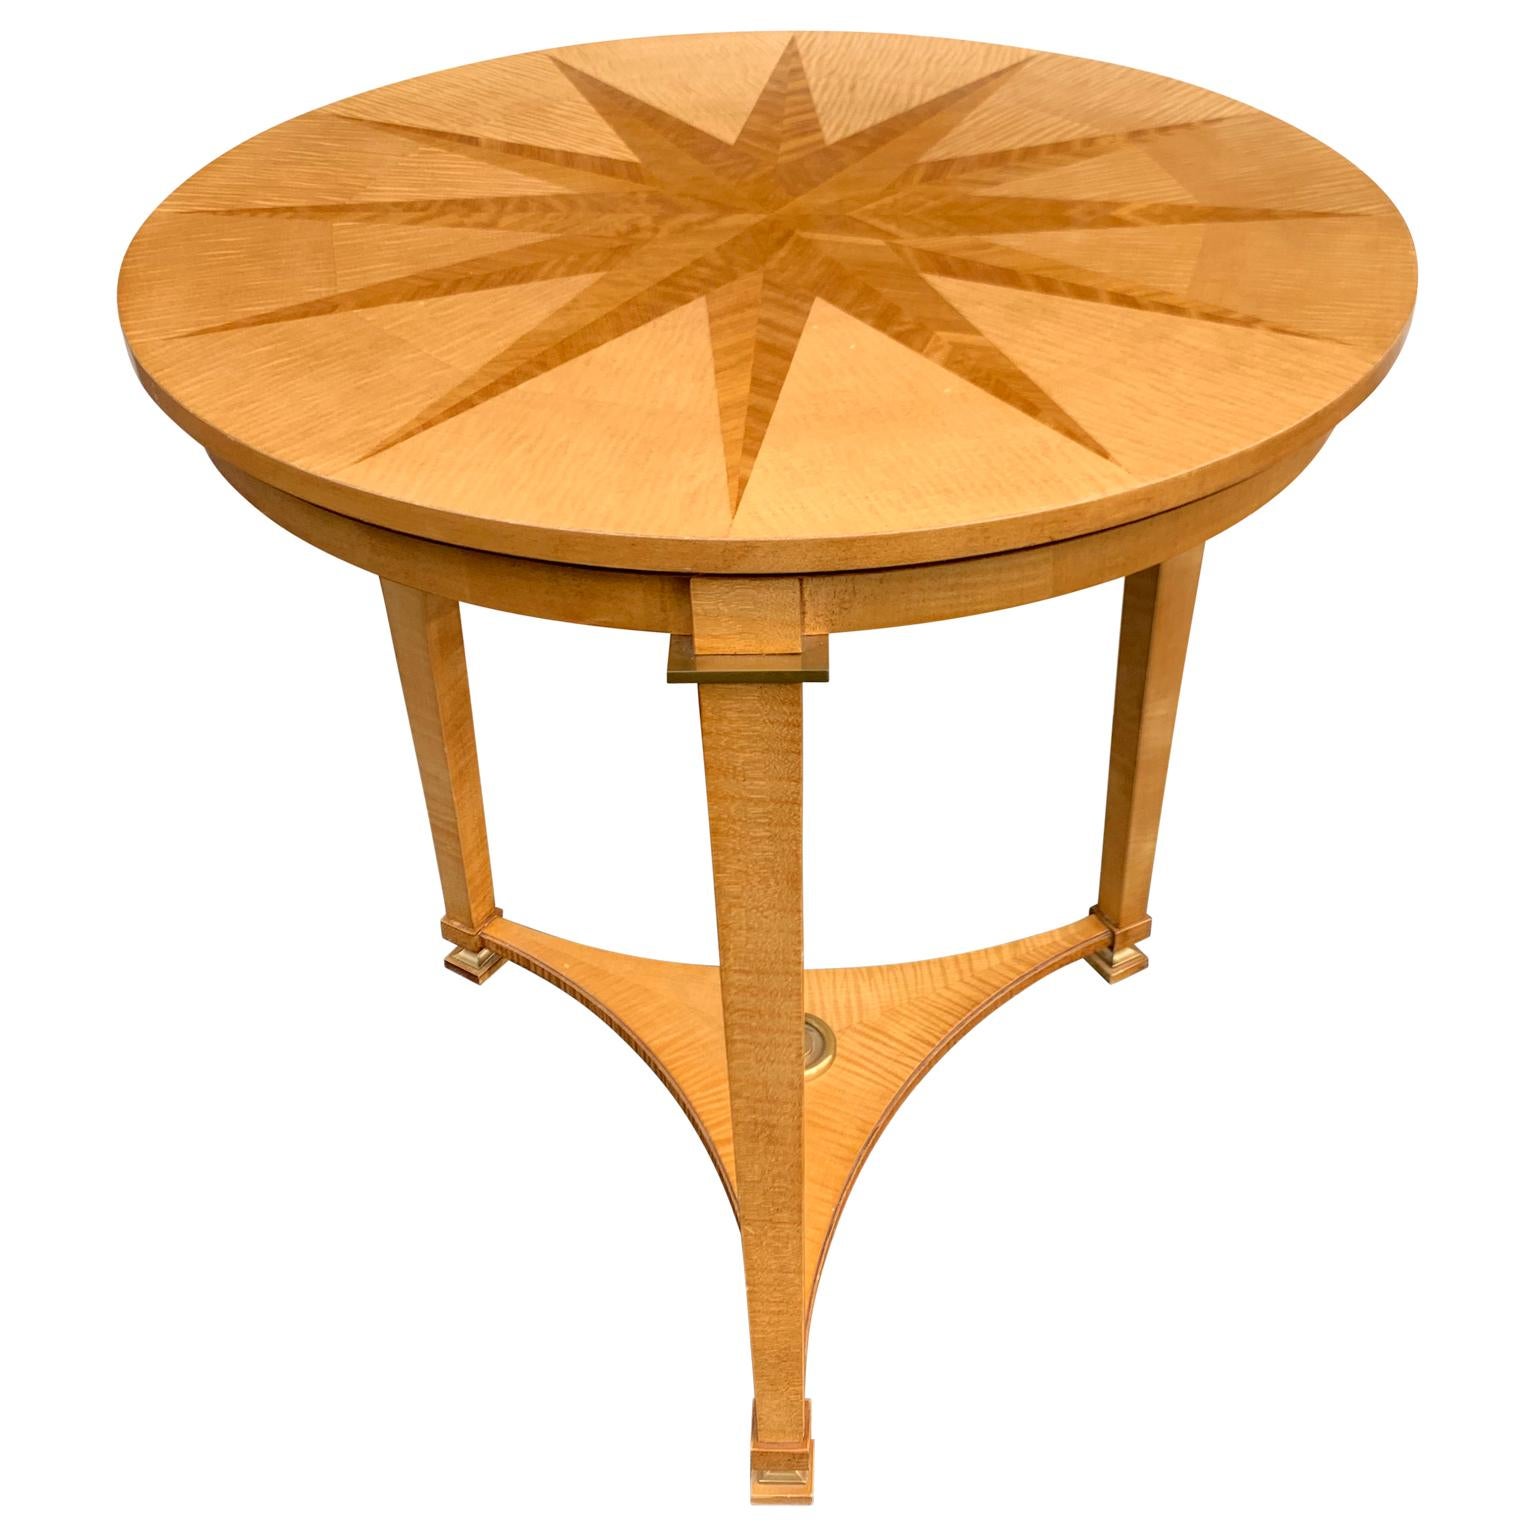 Circular Mid-Century Modern maple sunburst inlaid Gueridon table, by the André Arbus collection for baker.

   